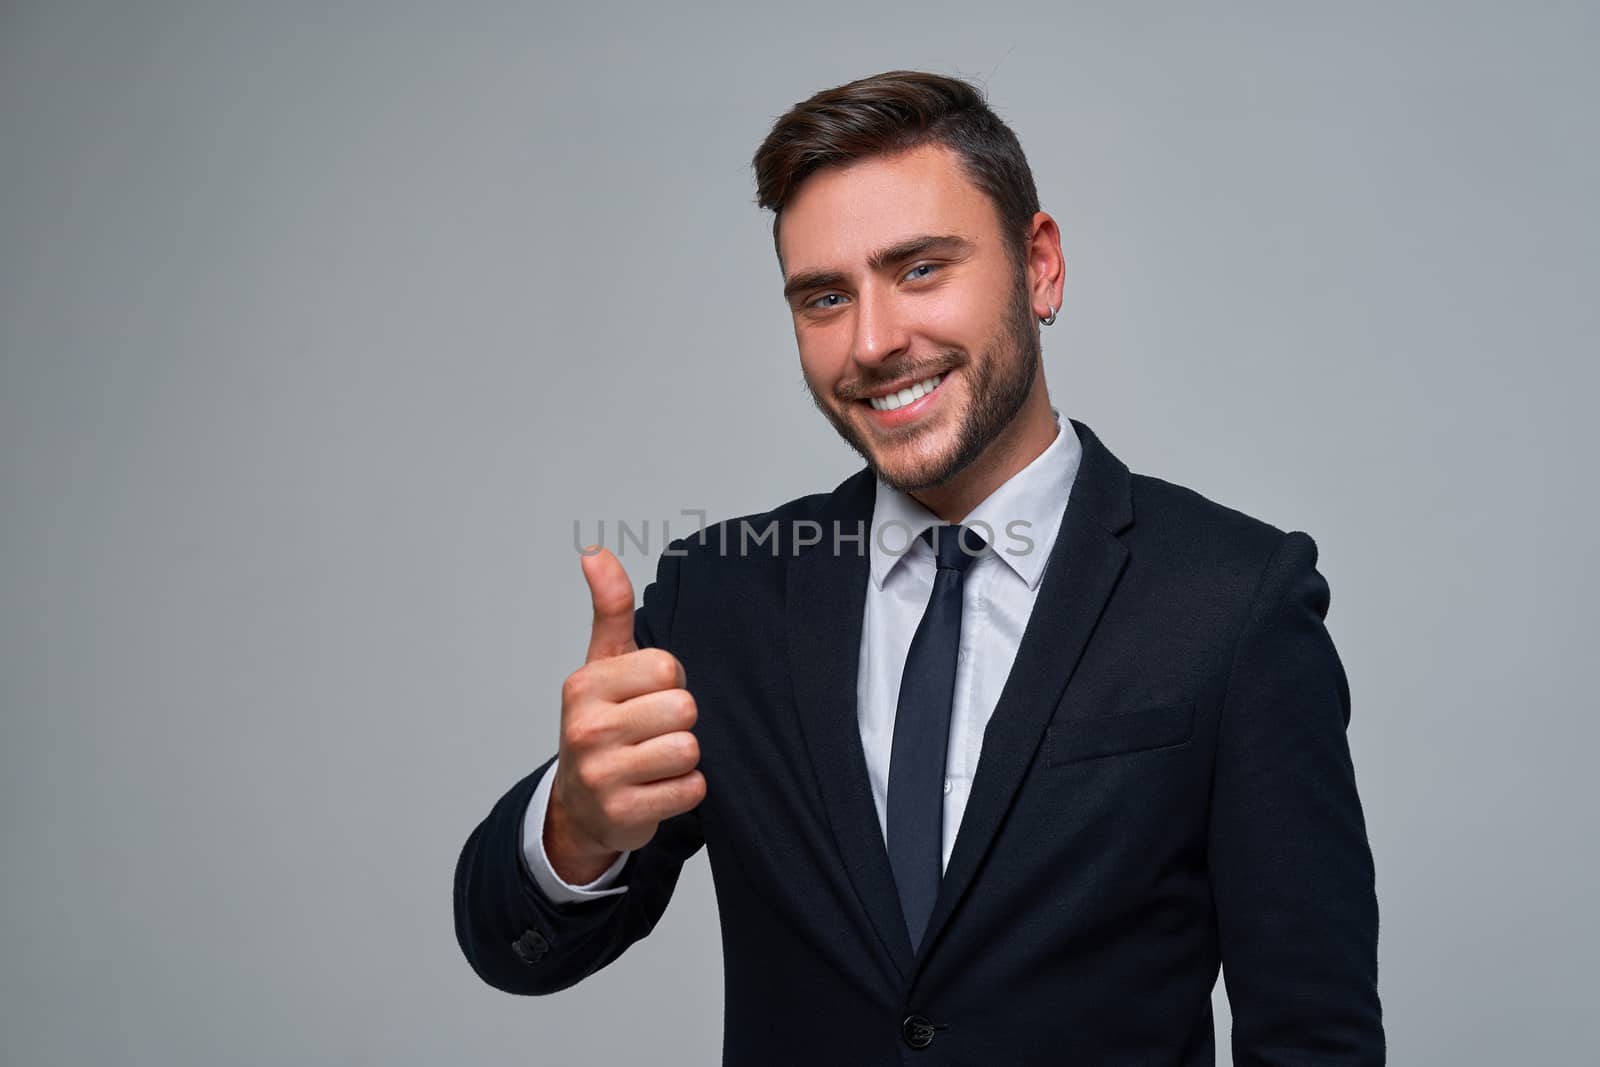 Businessman Business person. Man business suit studio gray background. Modern millenial person Showing thumbs up sign. Portrait of charming successful happy entrepreneur